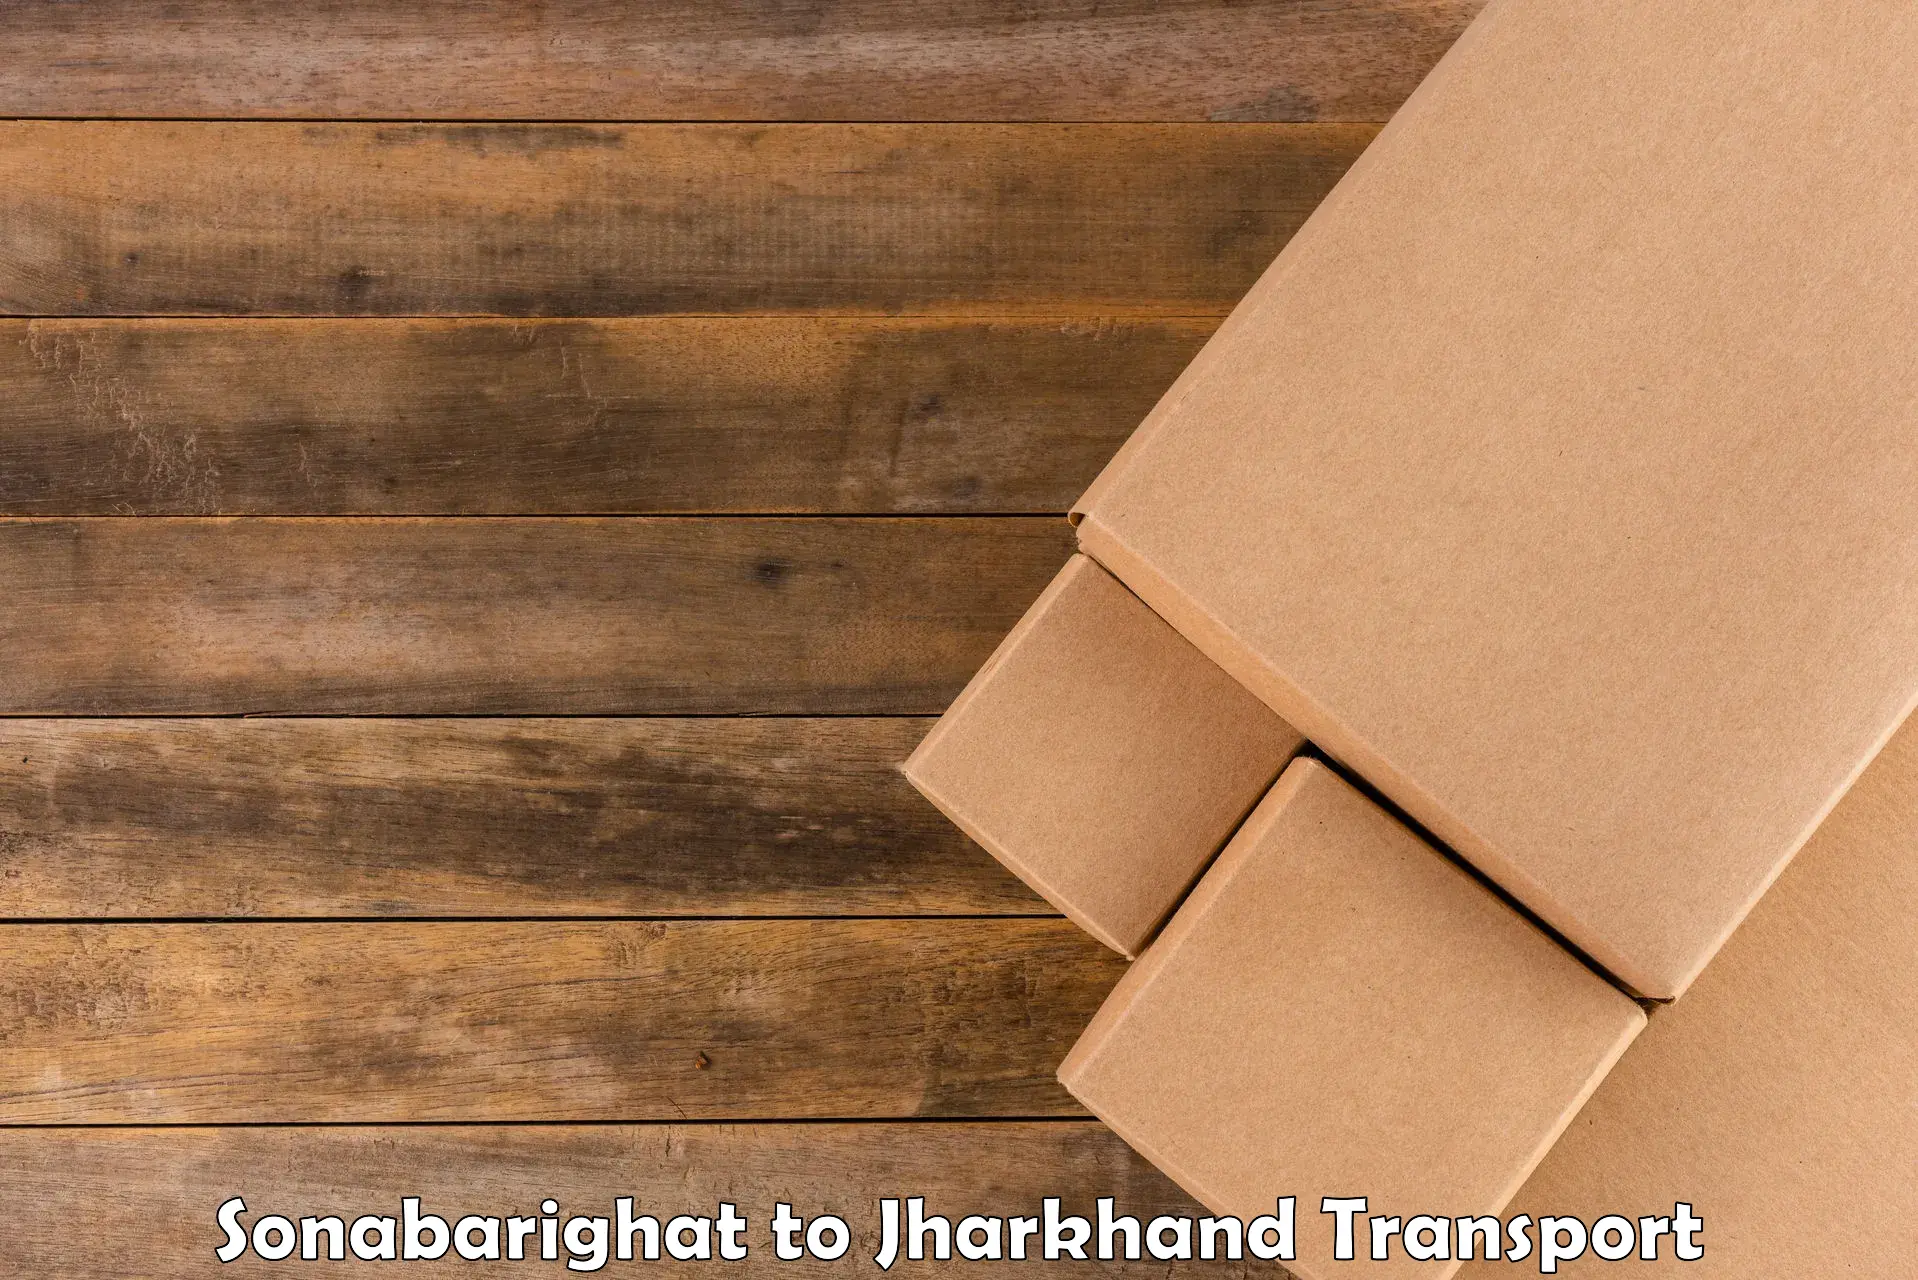 Air freight transport services Sonabarighat to Dhanbad